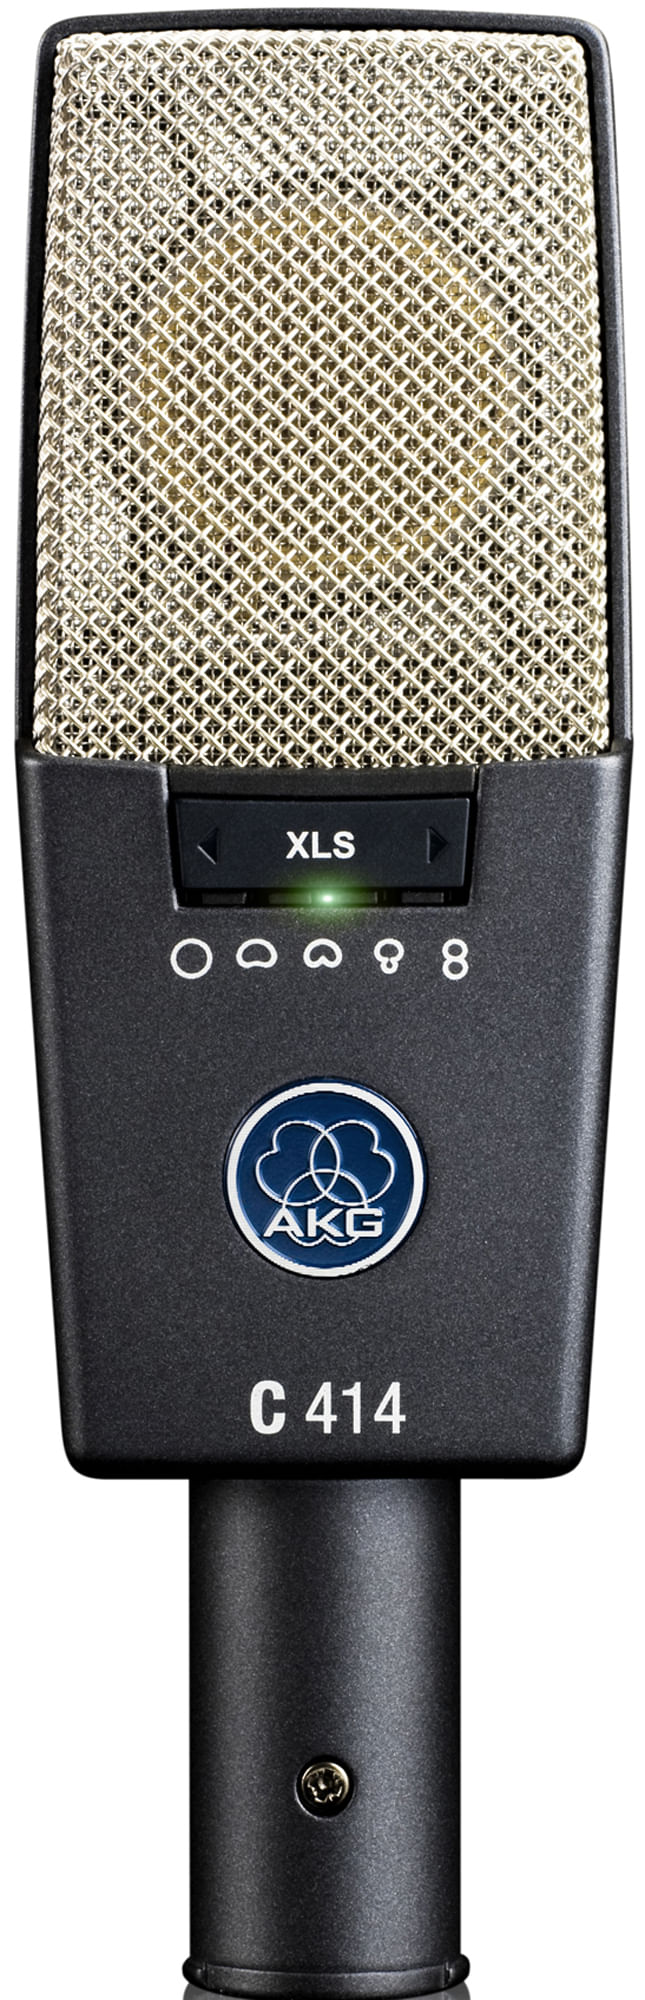 AKG C414 XLS Reference Condenser Microphone - Cosmo Music